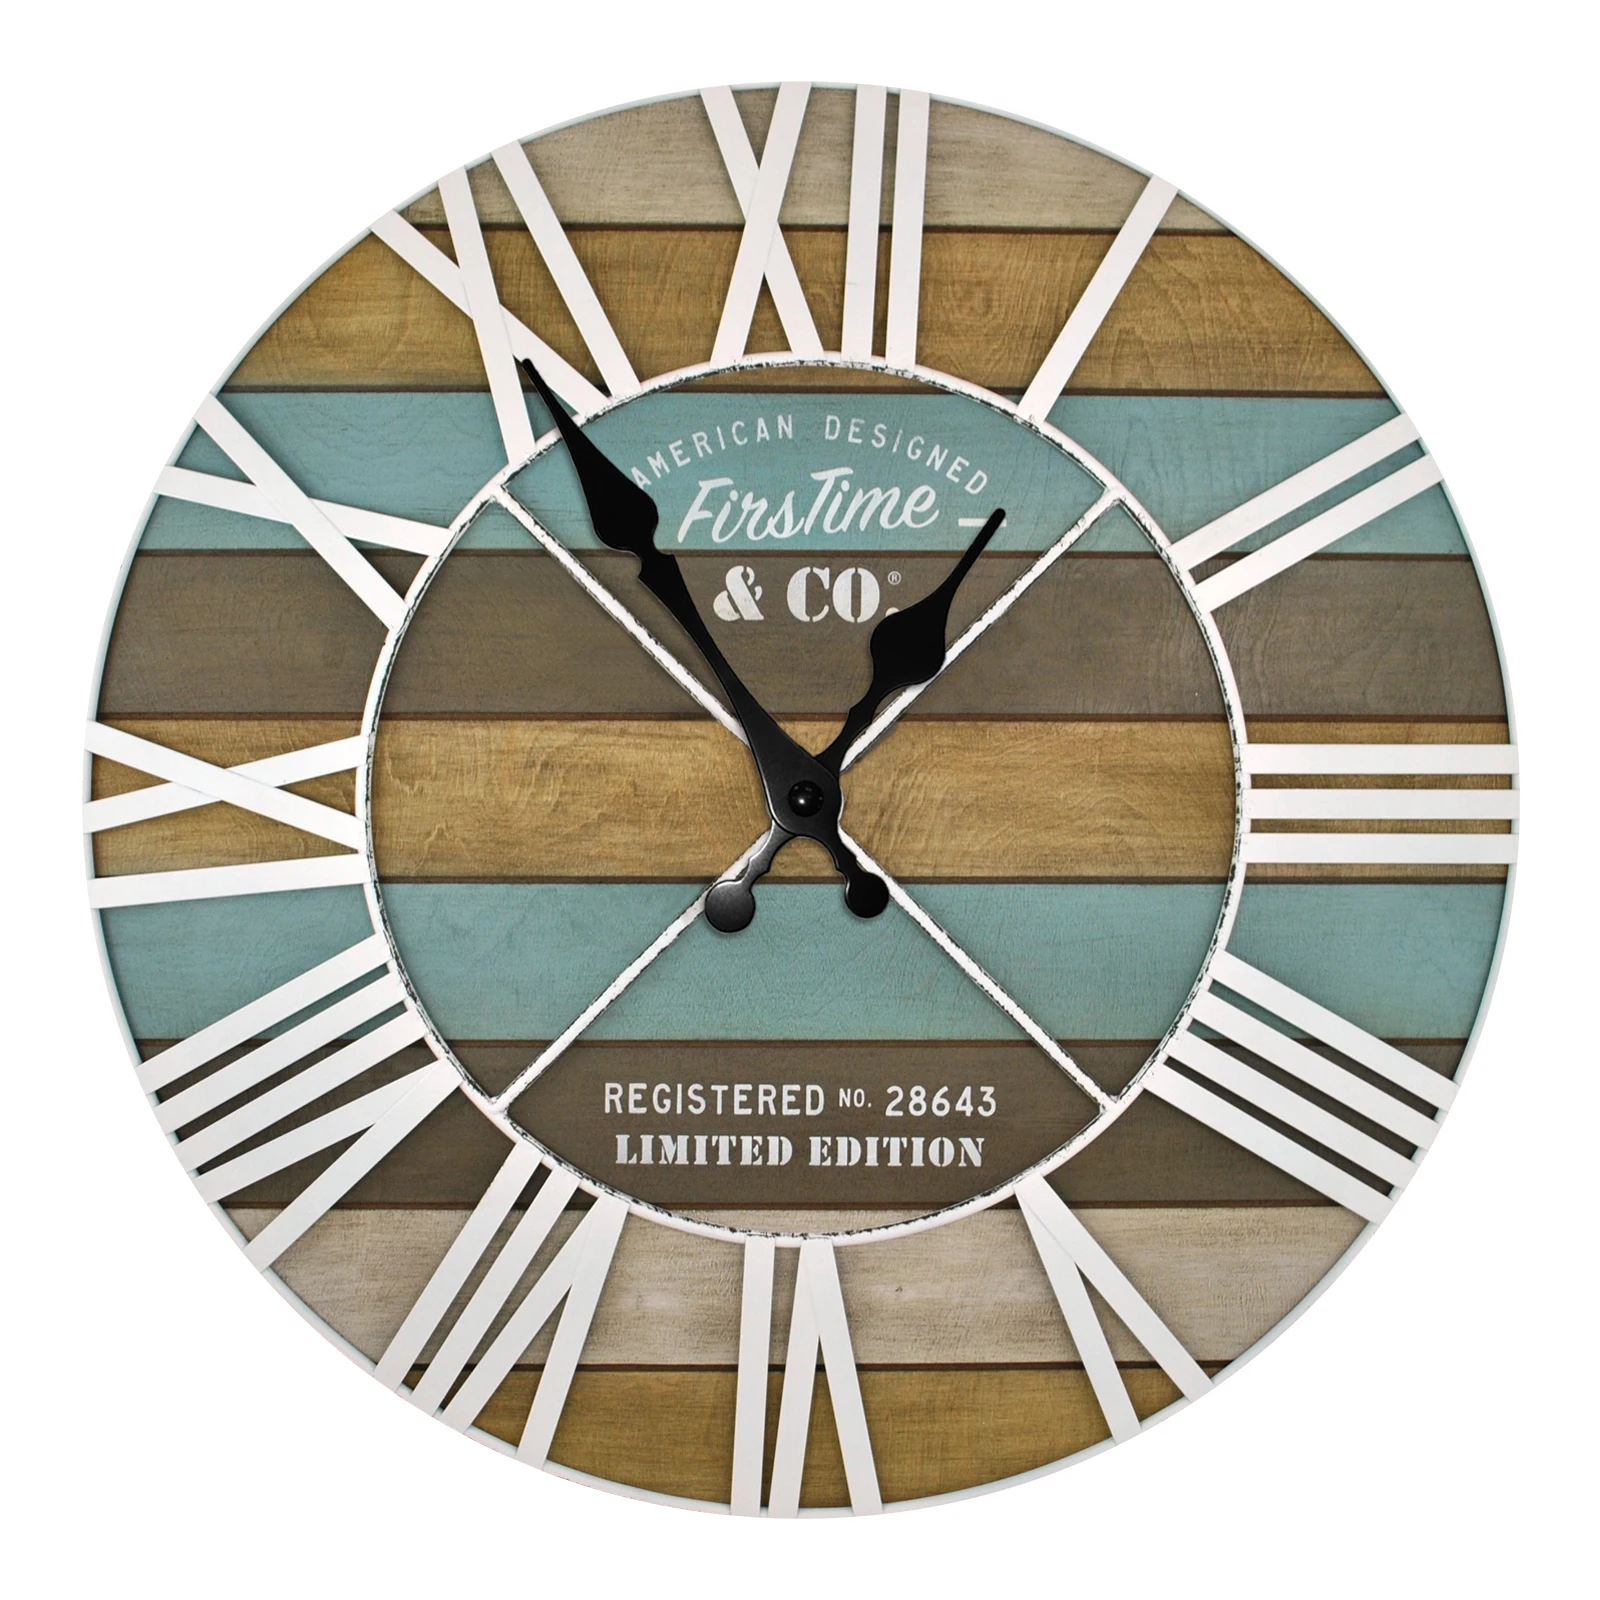 

Rustic Wall Clocks for Kitchen Bathroom Silent Non Ticking Country Style Quartz Clock Decorative for Living Room Home 12 Inch